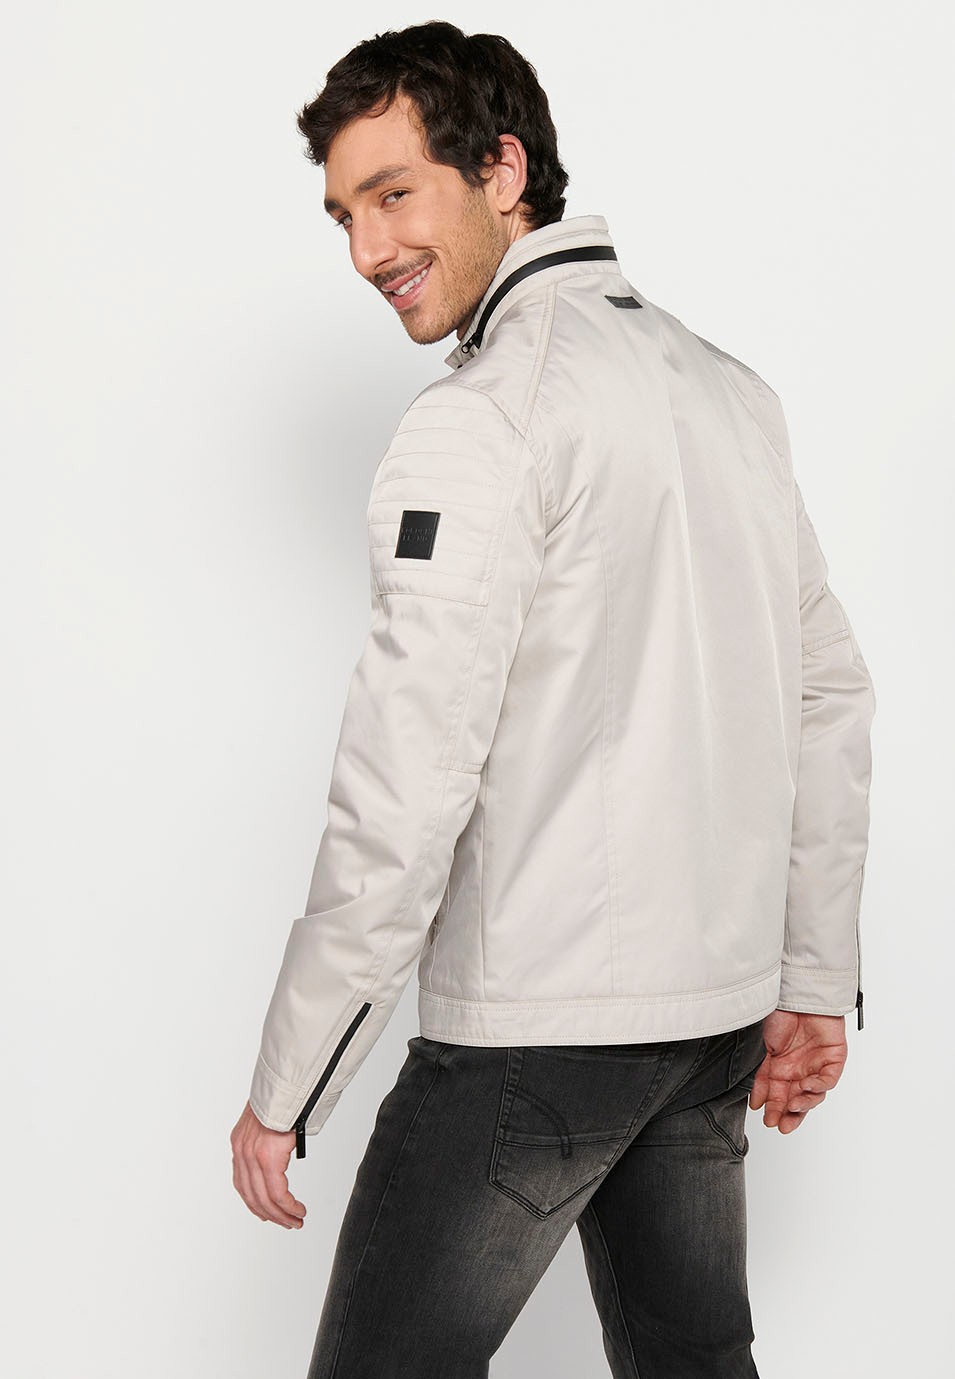 Beige Long-sleeved Jacket with Round Neck and Front Zipper Closure for Men 5